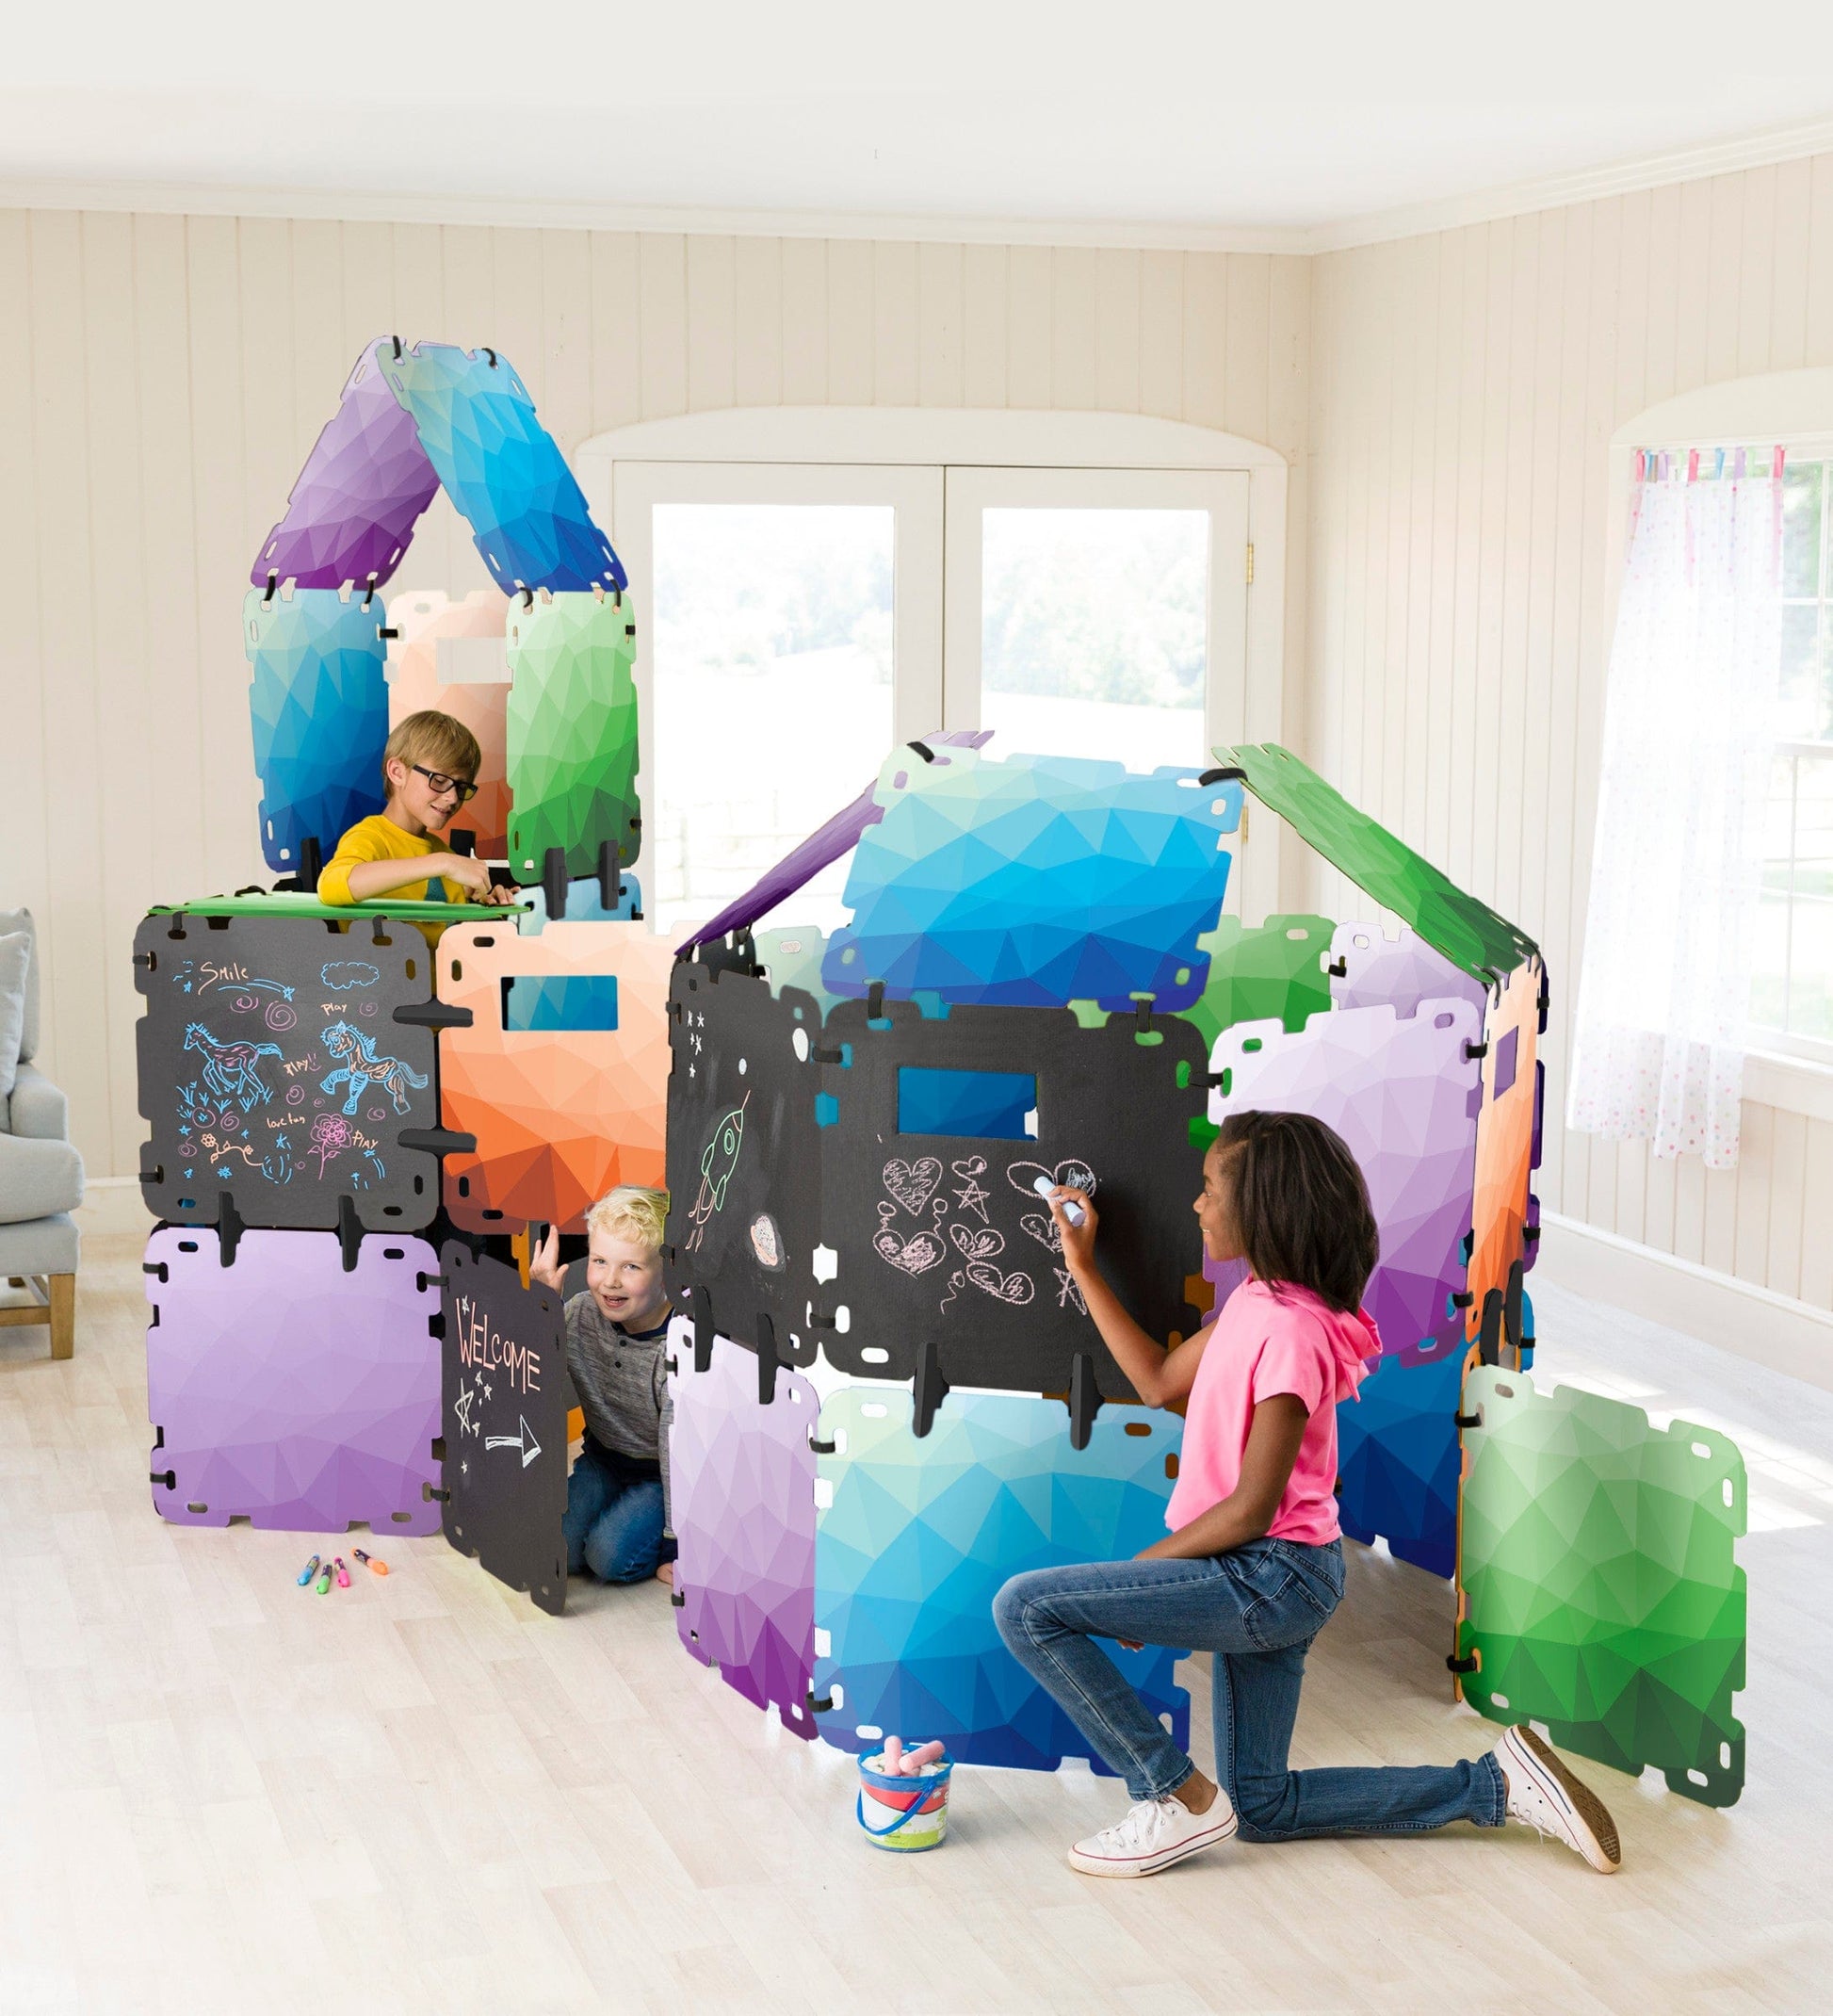 32-Panel ChalkScapes Fantasy Forts Kit – Hearthsong